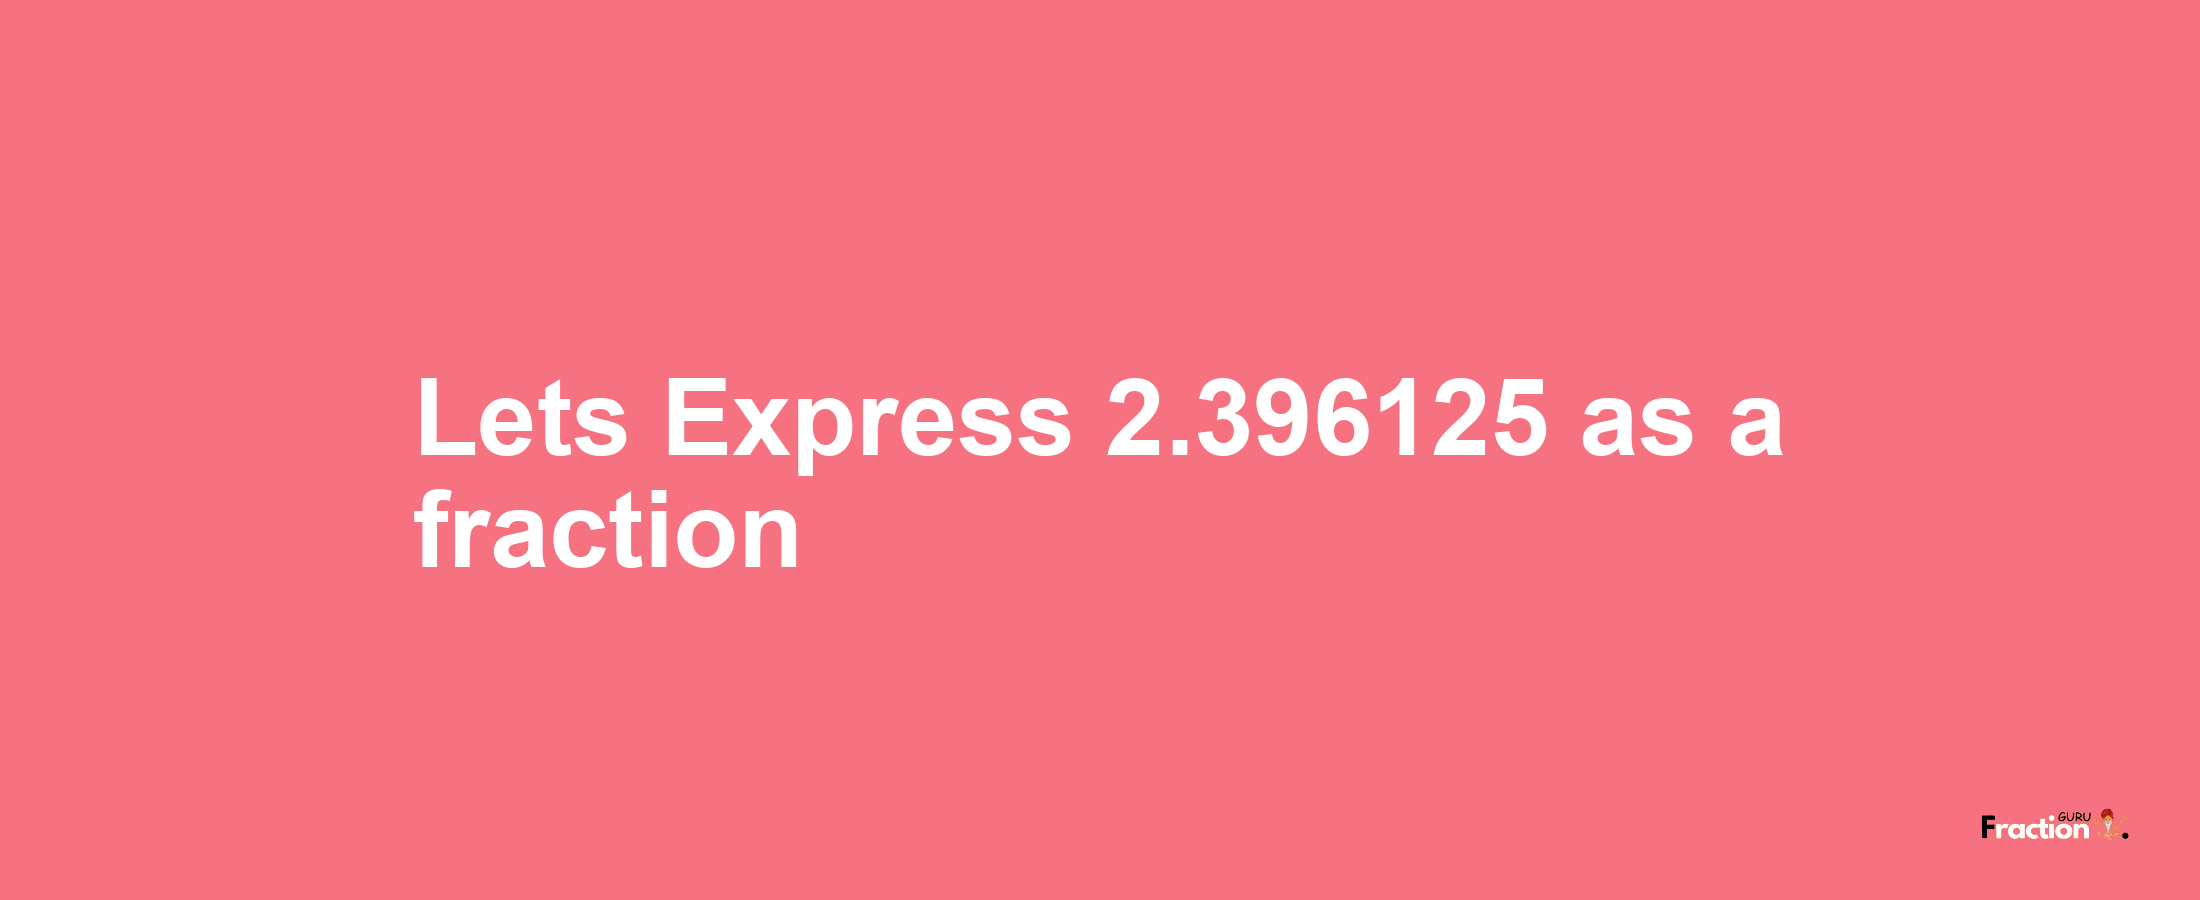 Lets Express 2.396125 as afraction